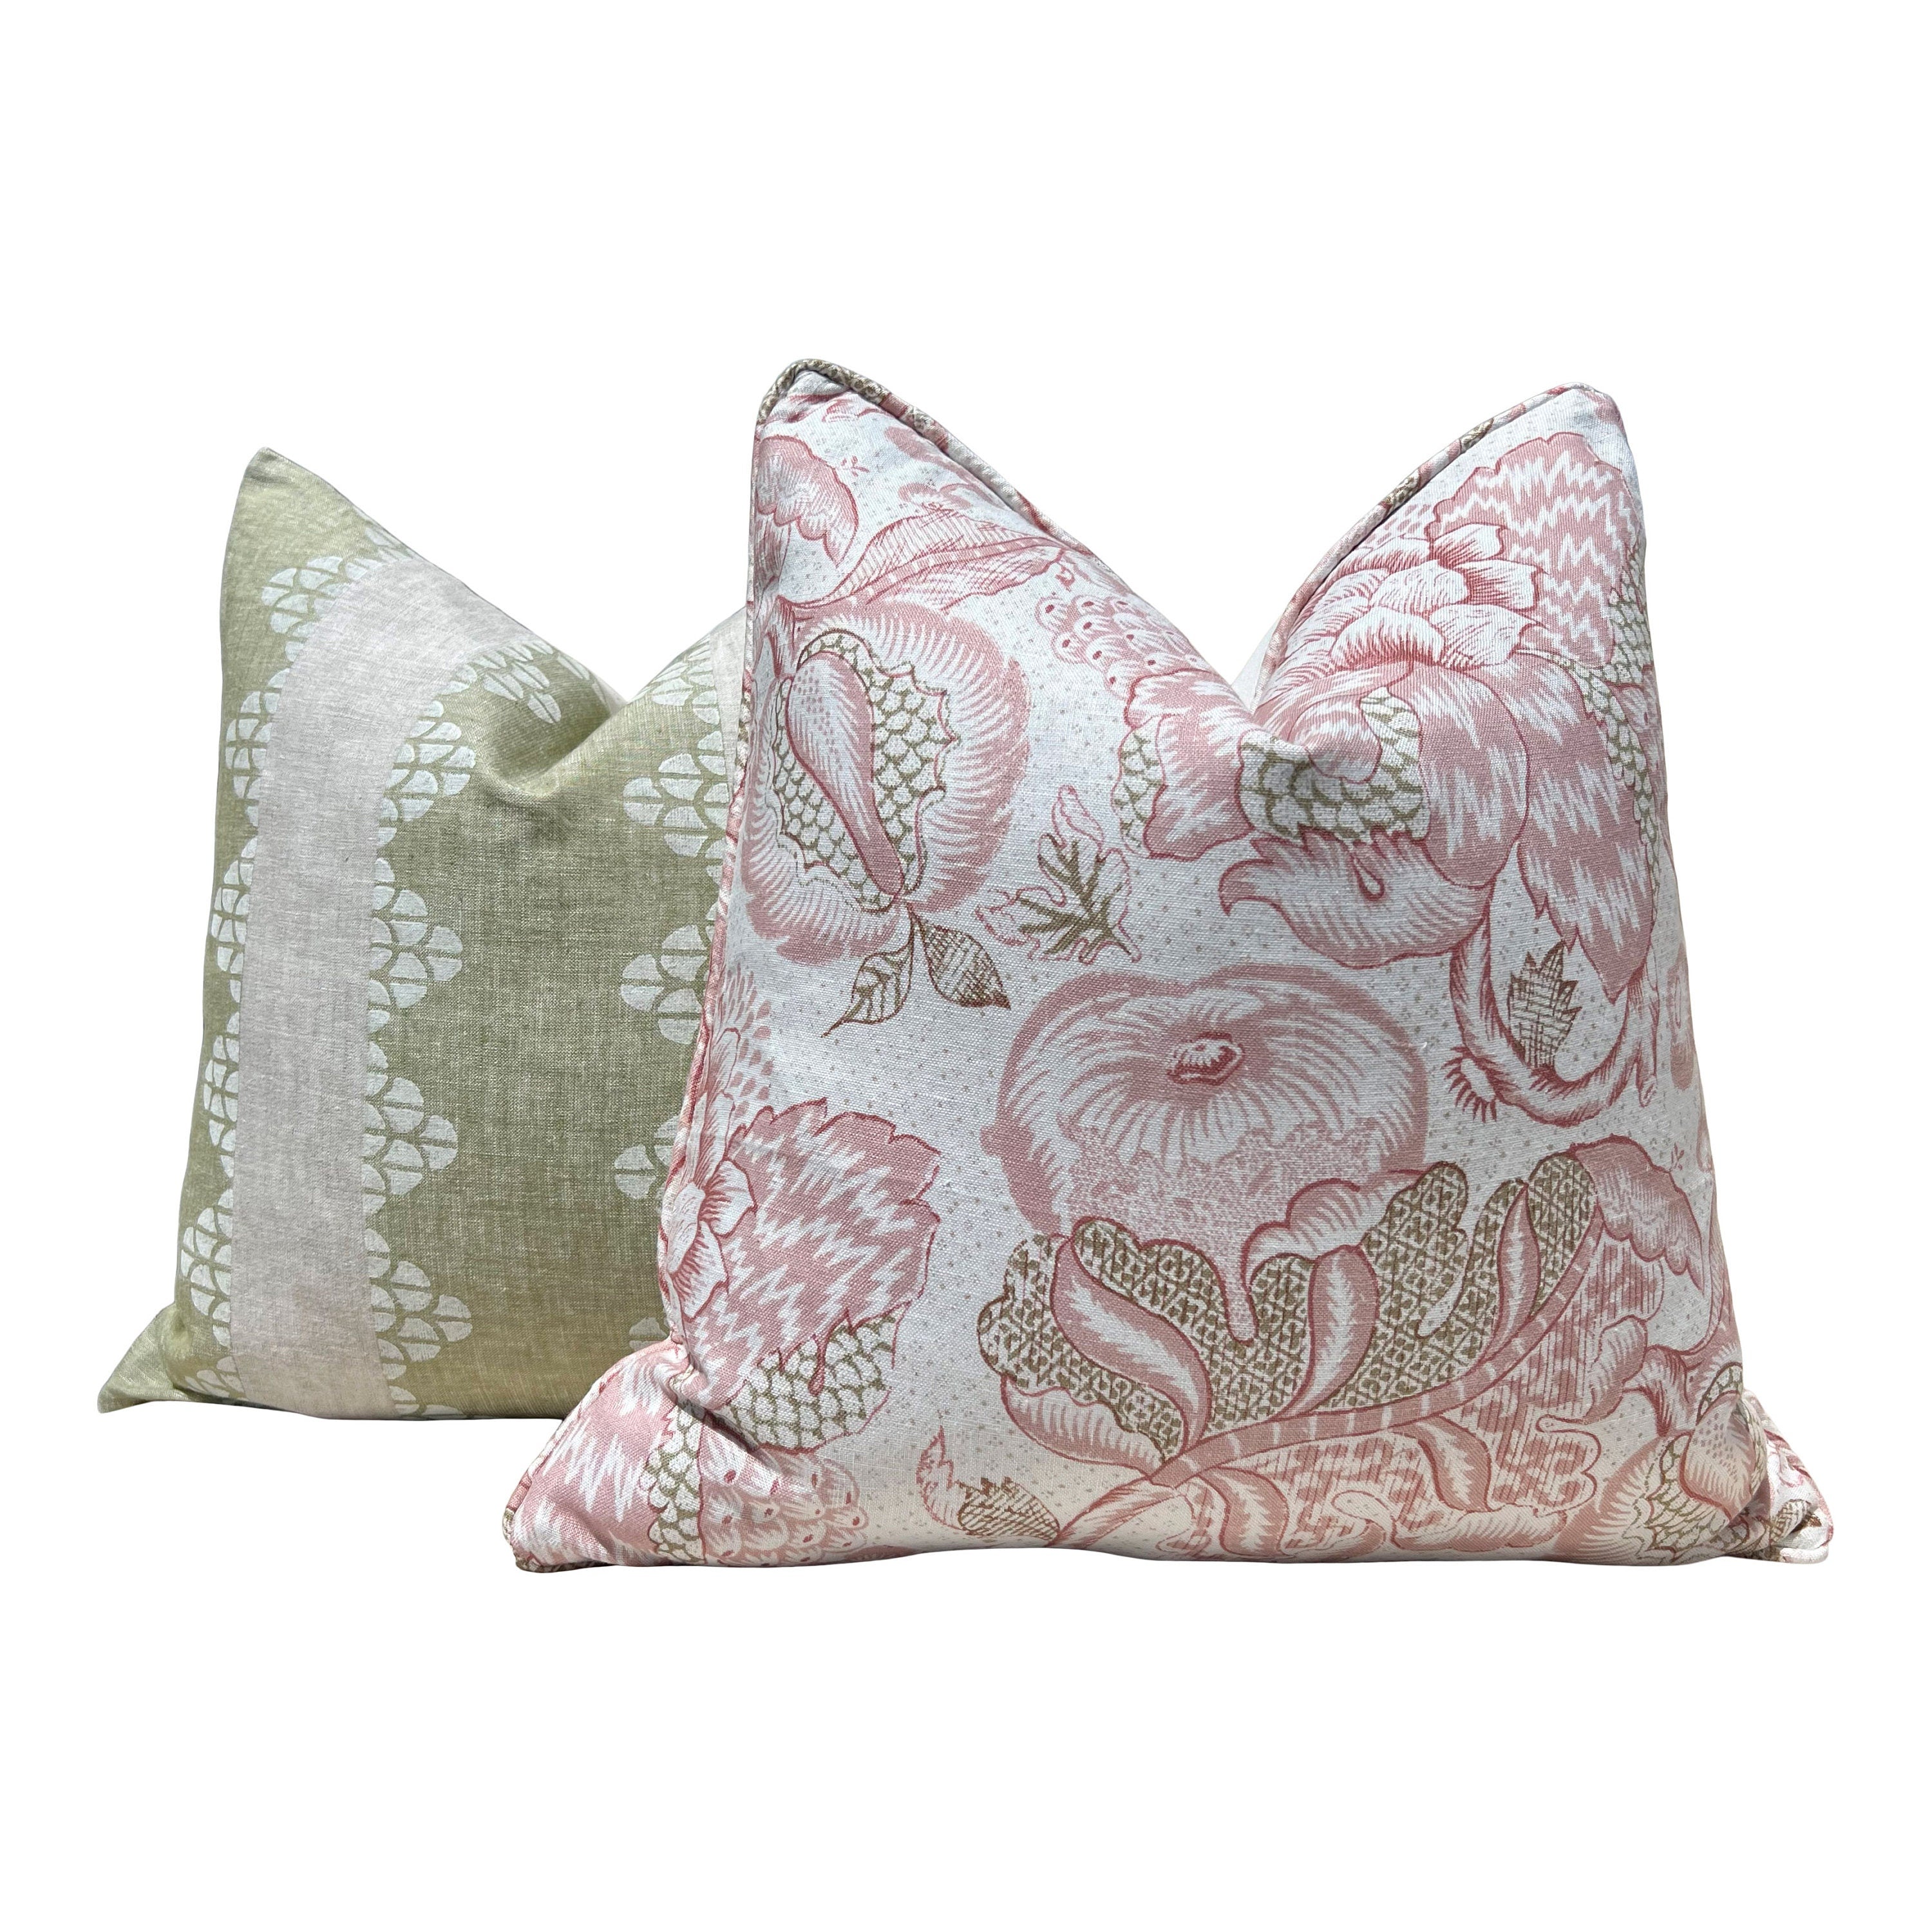 Thibaut Westmont Floral Pillow in Blush. Designer Pillows // Floral Pillows in Pink and Green // High End Linen Pillows // Euro Sham Cover